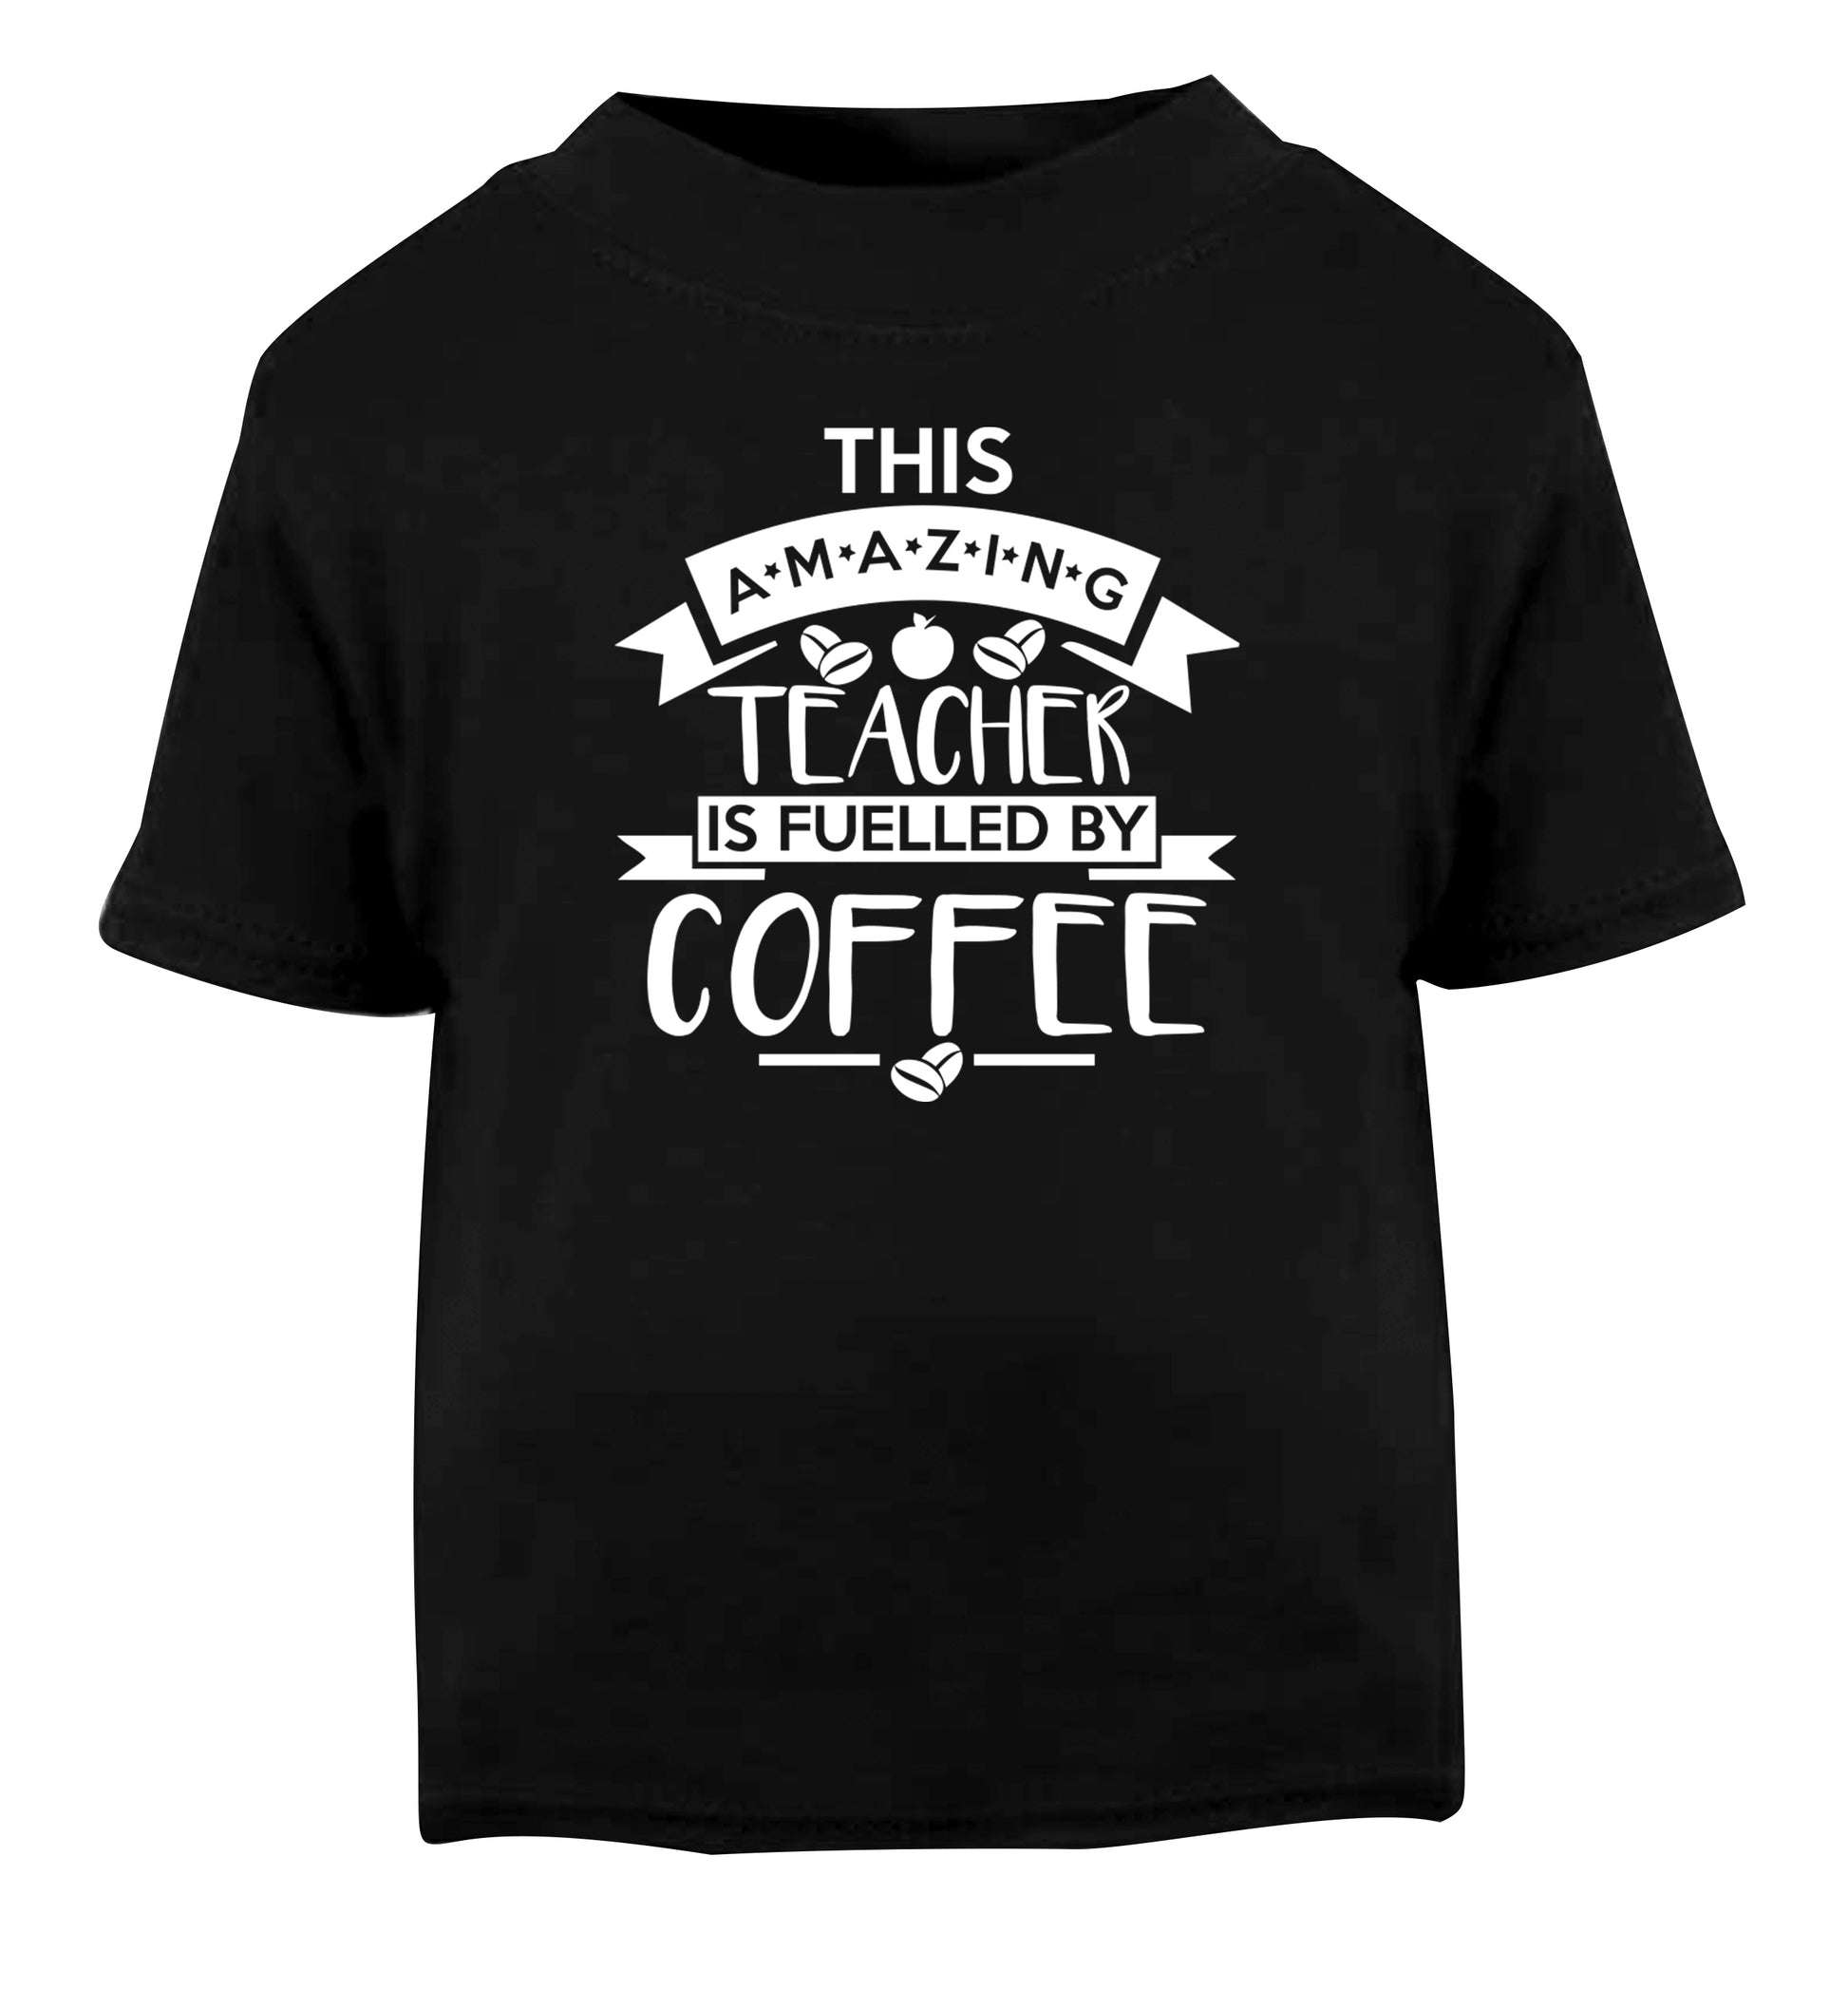 This amazing teacher is fuelled by coffee Black Baby Toddler Tshirt 2 years